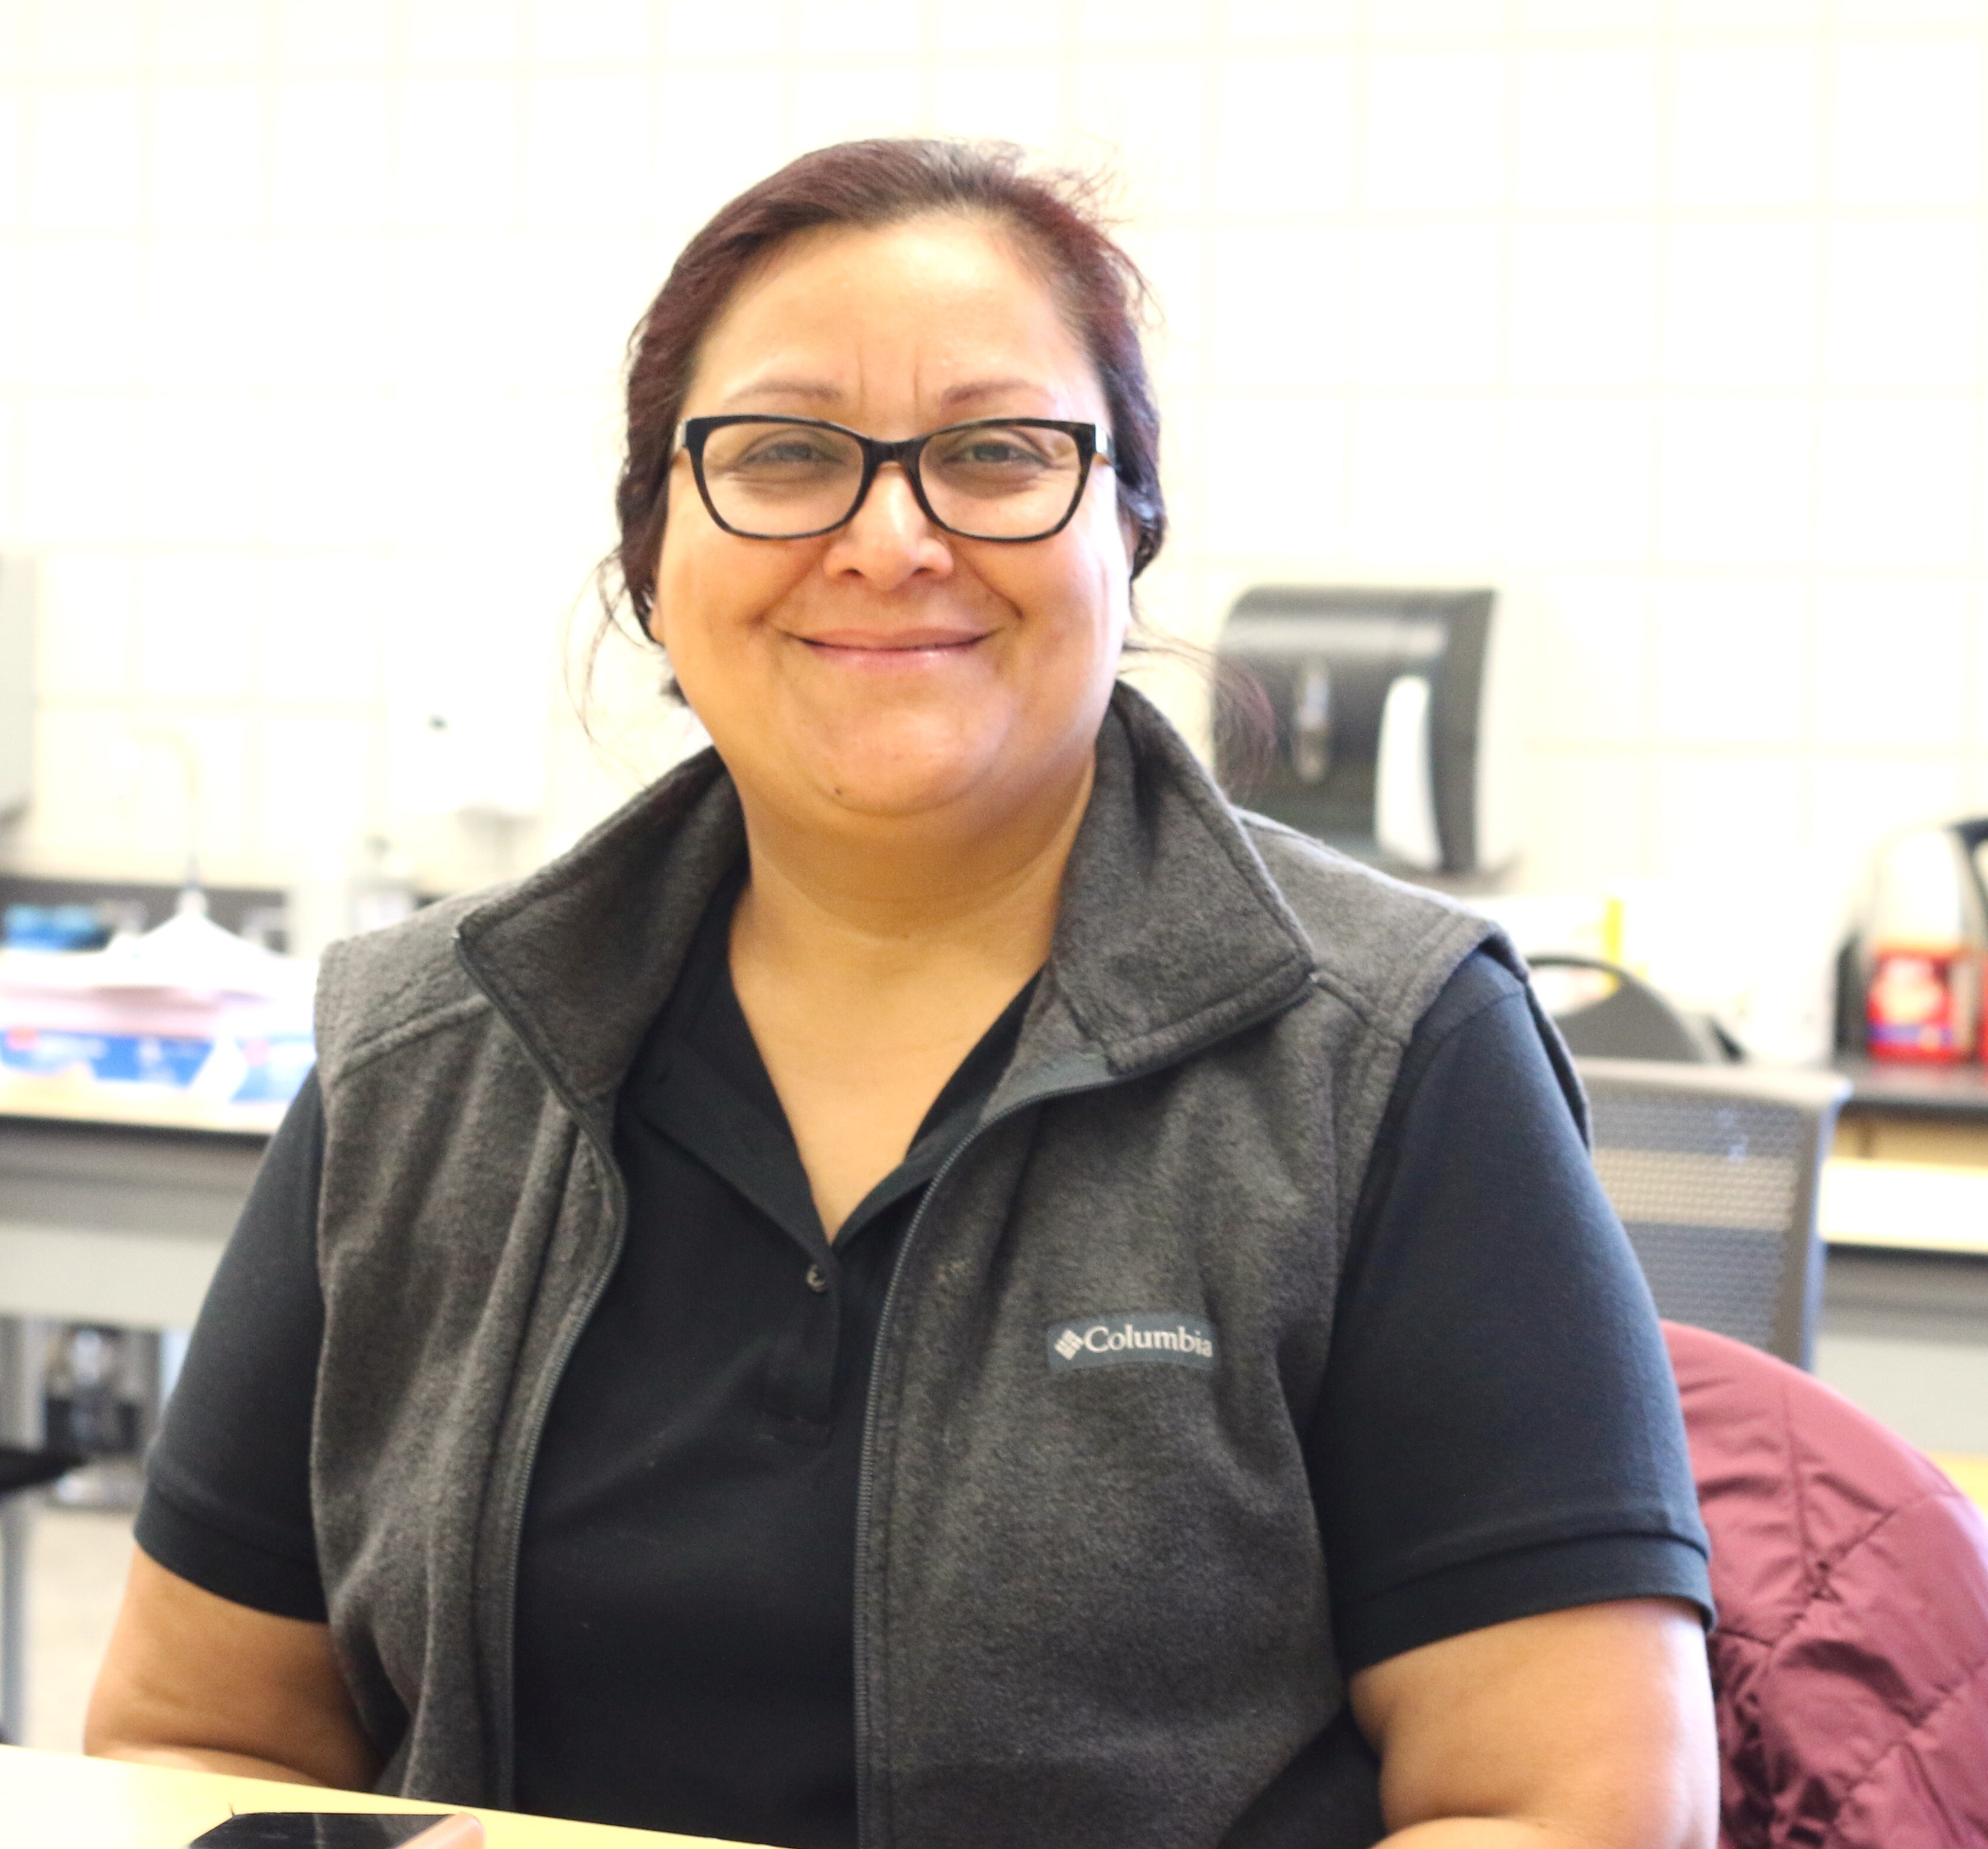 Lesvia Marroquin is a Parent Action Leader for Sibley and attended many of the recent sessions. She said seeing the results of the program was amazing.